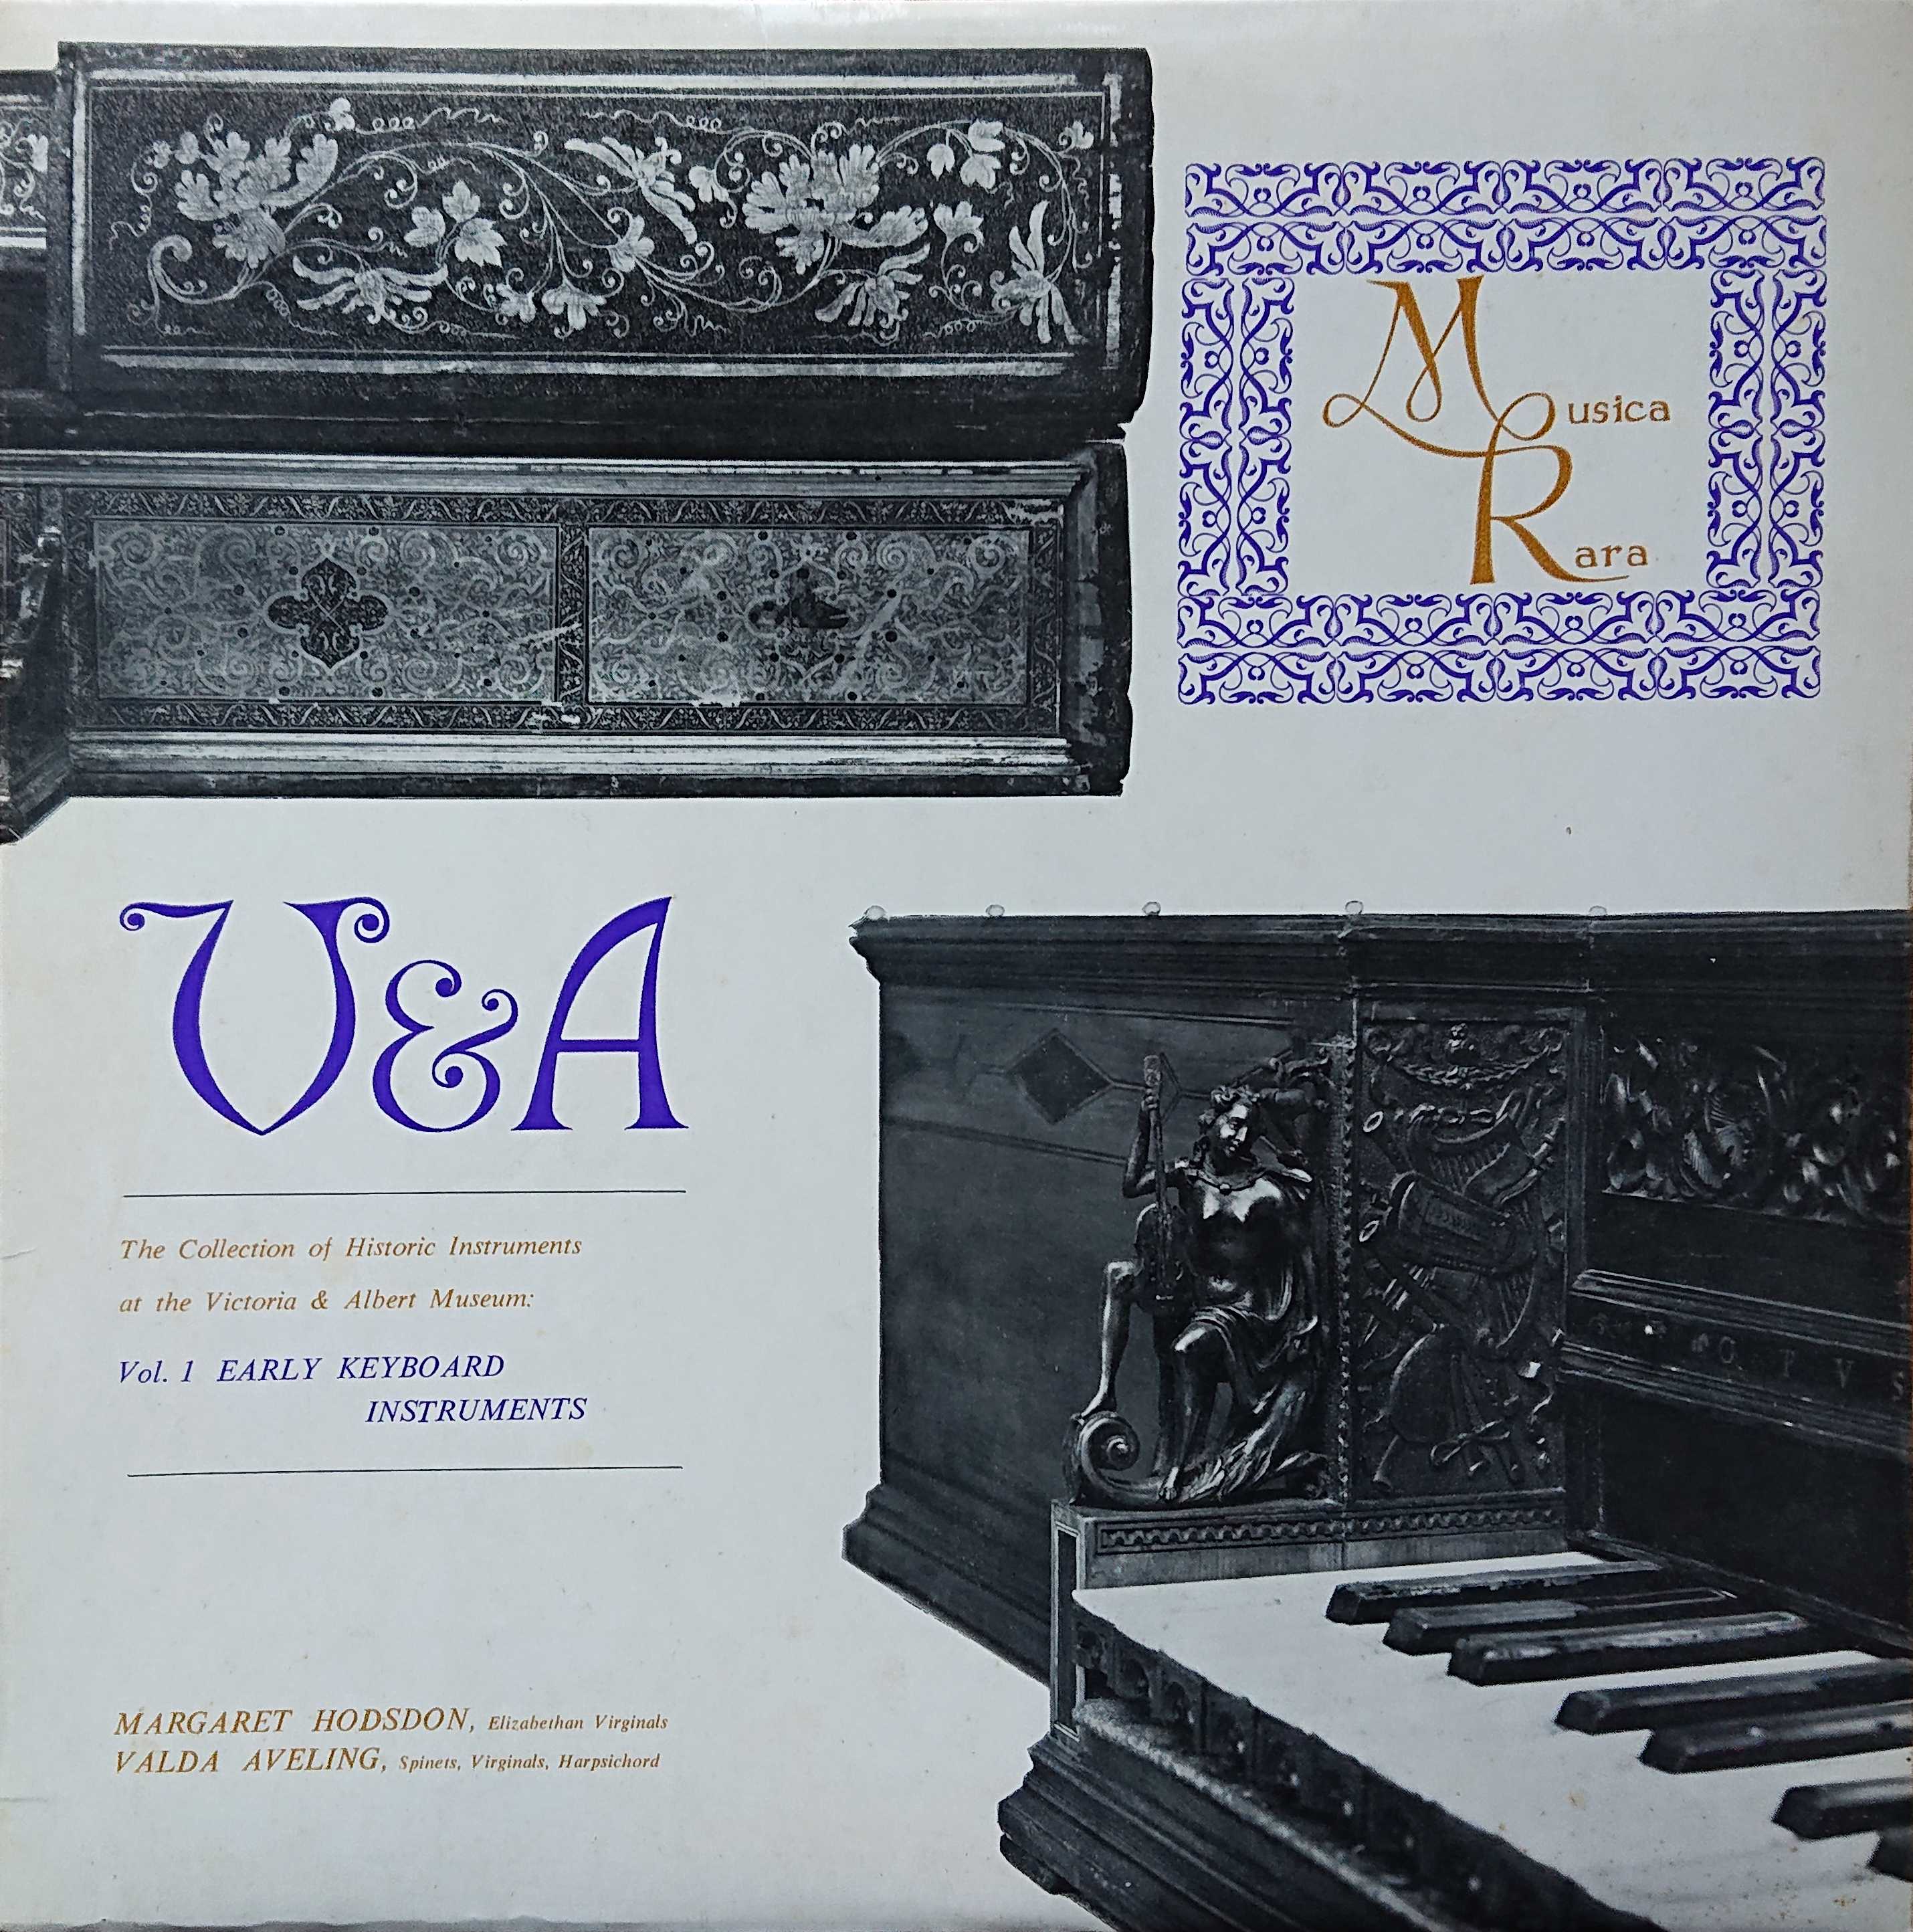 Picture of The V & A keyboard collection - Volume I by artist Various from the BBC albums - Records and Tapes library